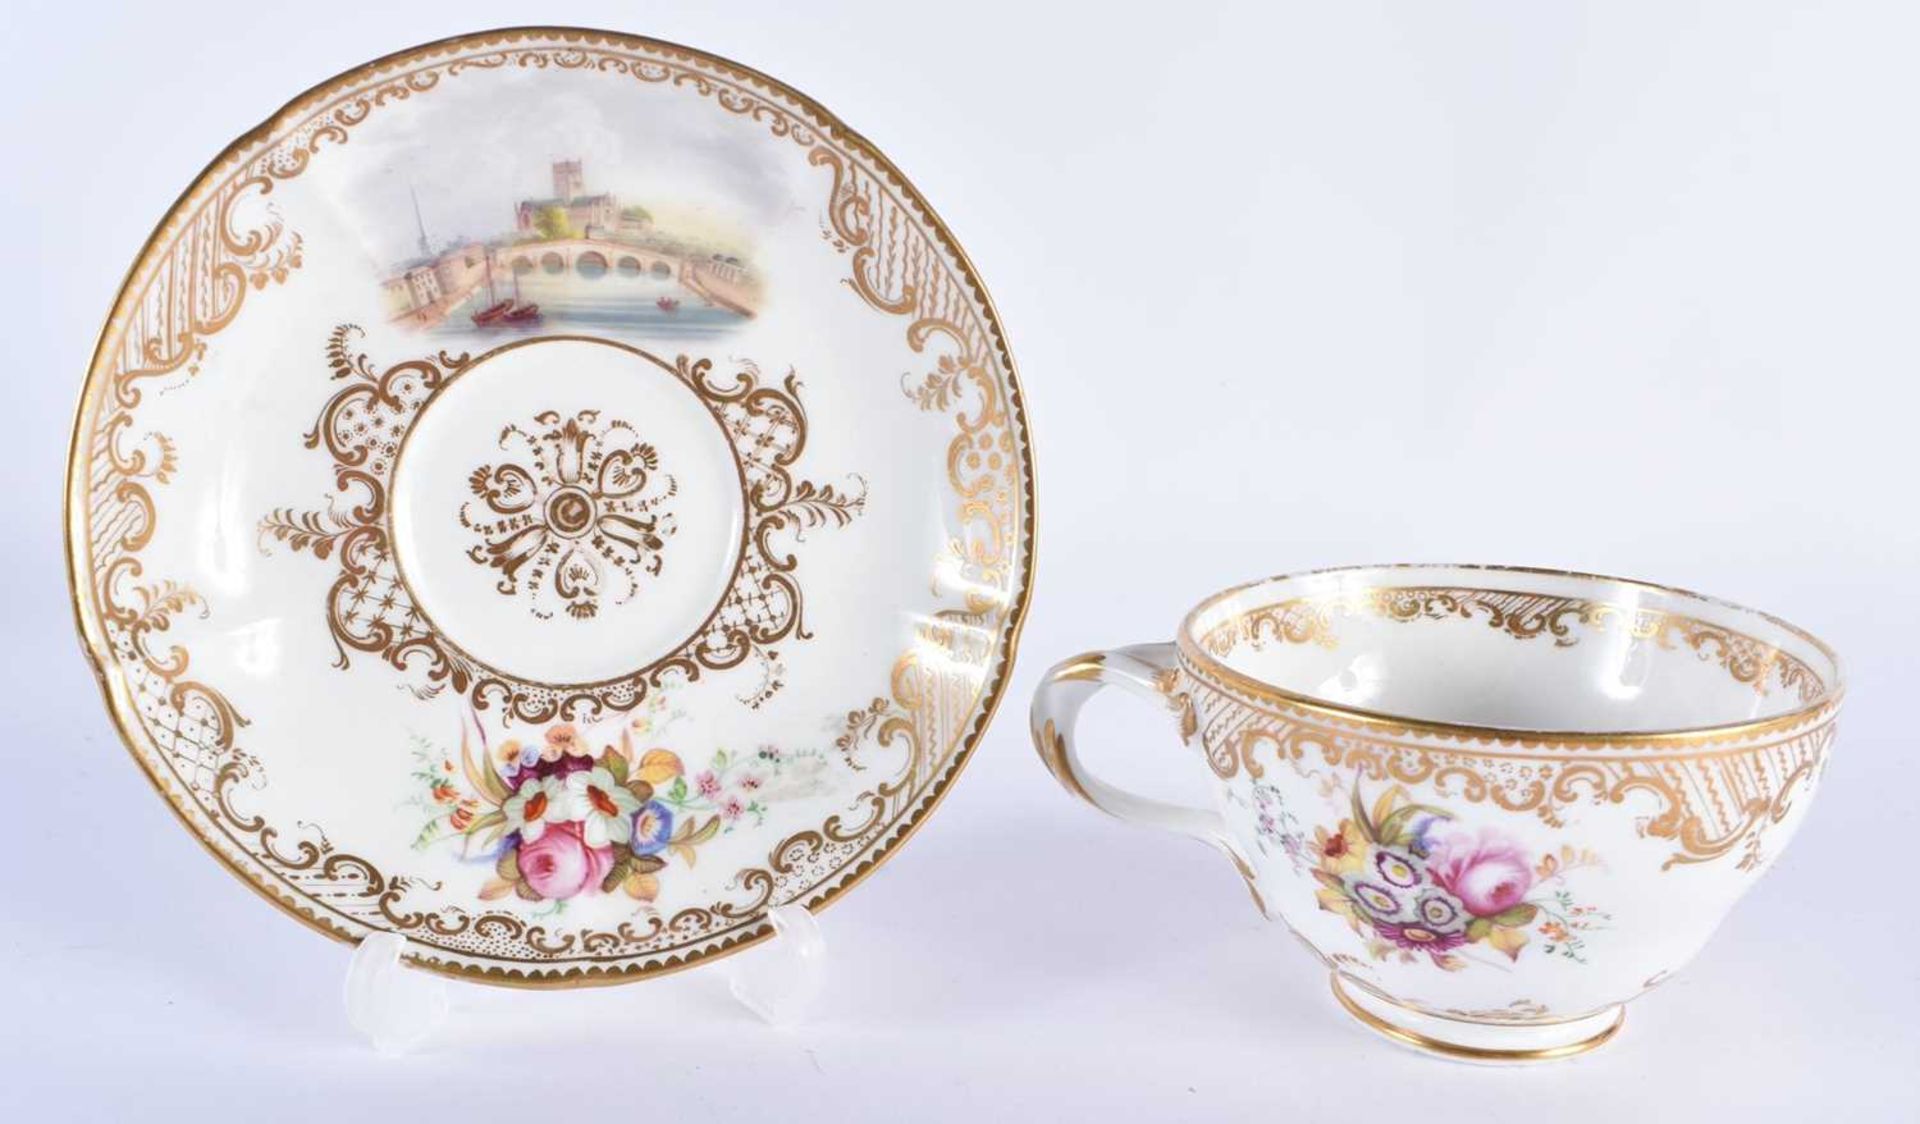 THREE 19TH CENTURY COALPORT SPARKS WORCESTER PORCELAIN CUPS AND SAUCERS painted with landscapes - Image 5 of 39